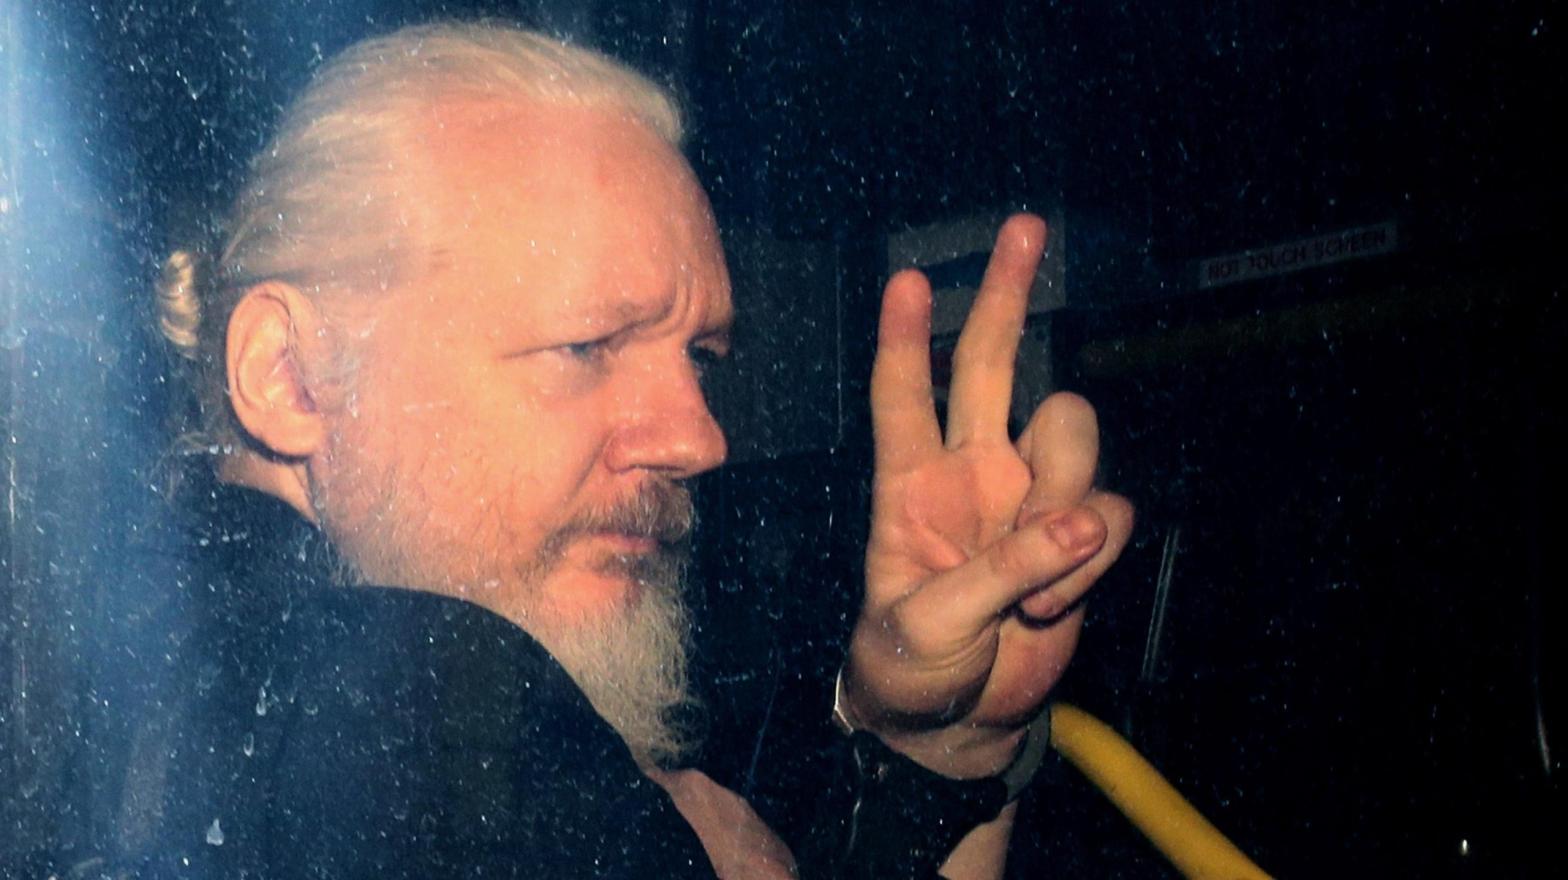 WikiLeaks founder Julian Assange gestures to photographers from a police vehicle while arriving at Westminster Magistrates court in April 2019 in London, England. (Photo: Jack Taylor, Getty Images)